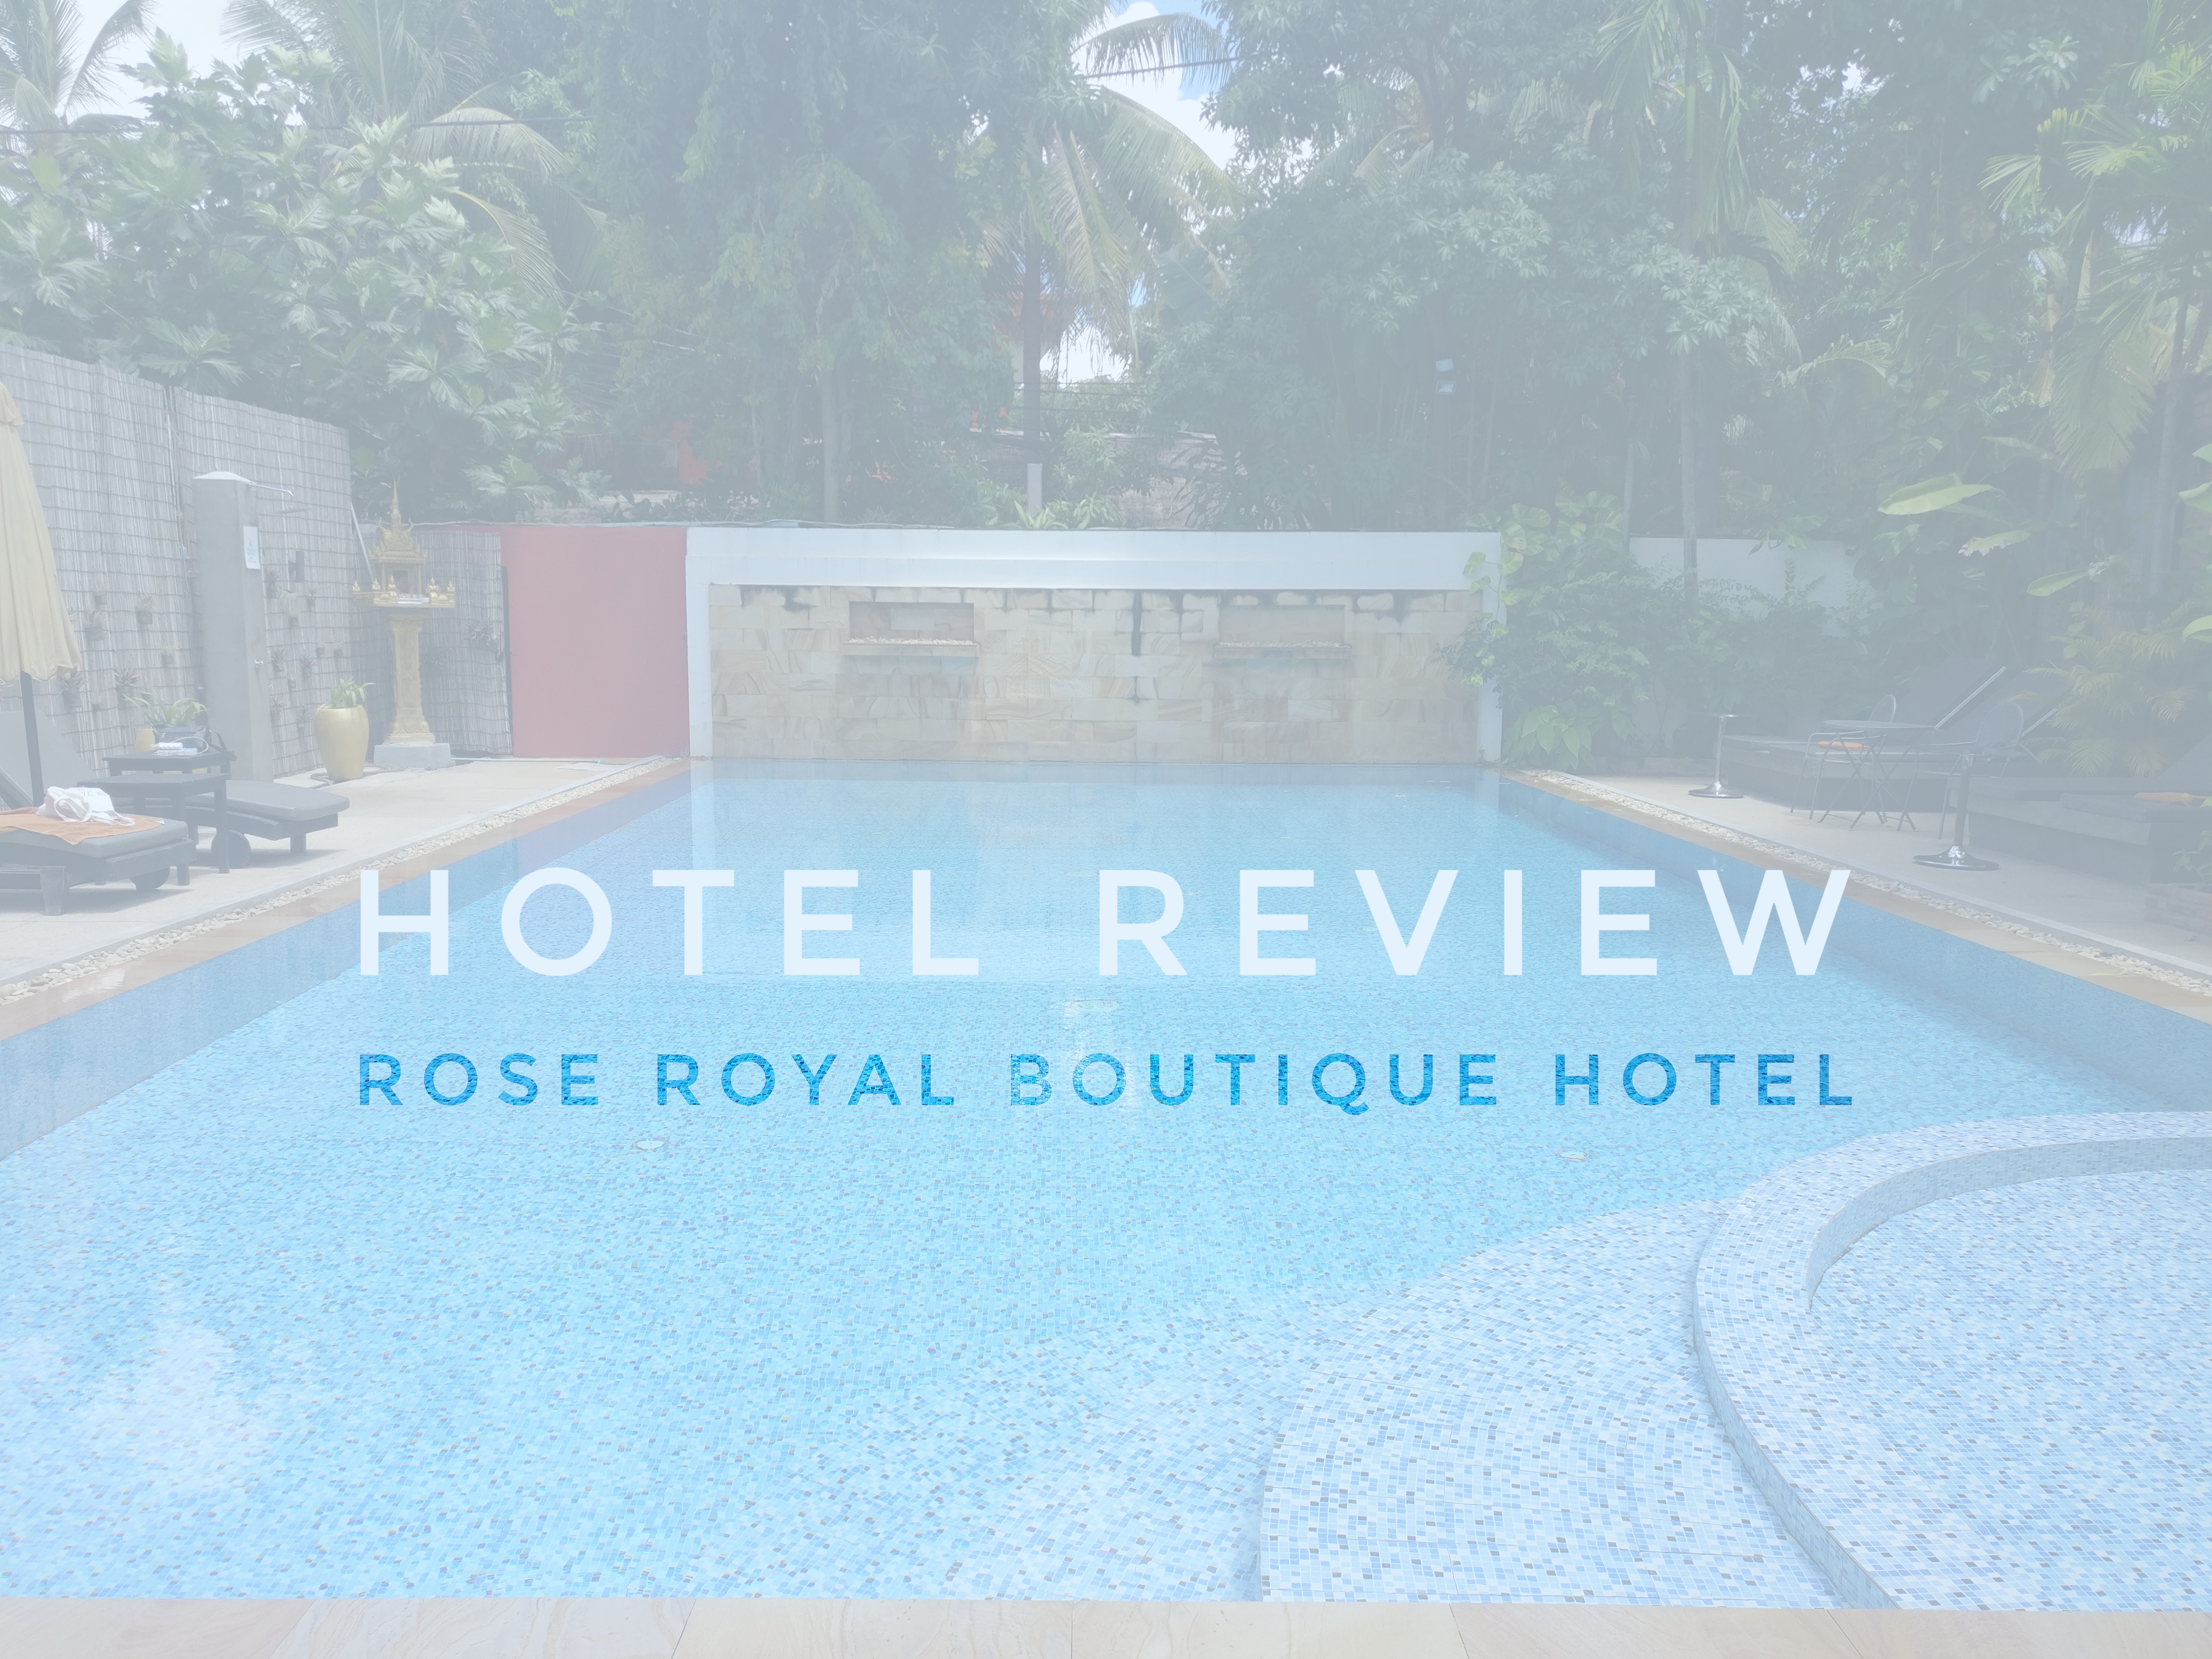 the swimming pool of rose royal boutique hotel in cambodia siem reap, asia and hotel review